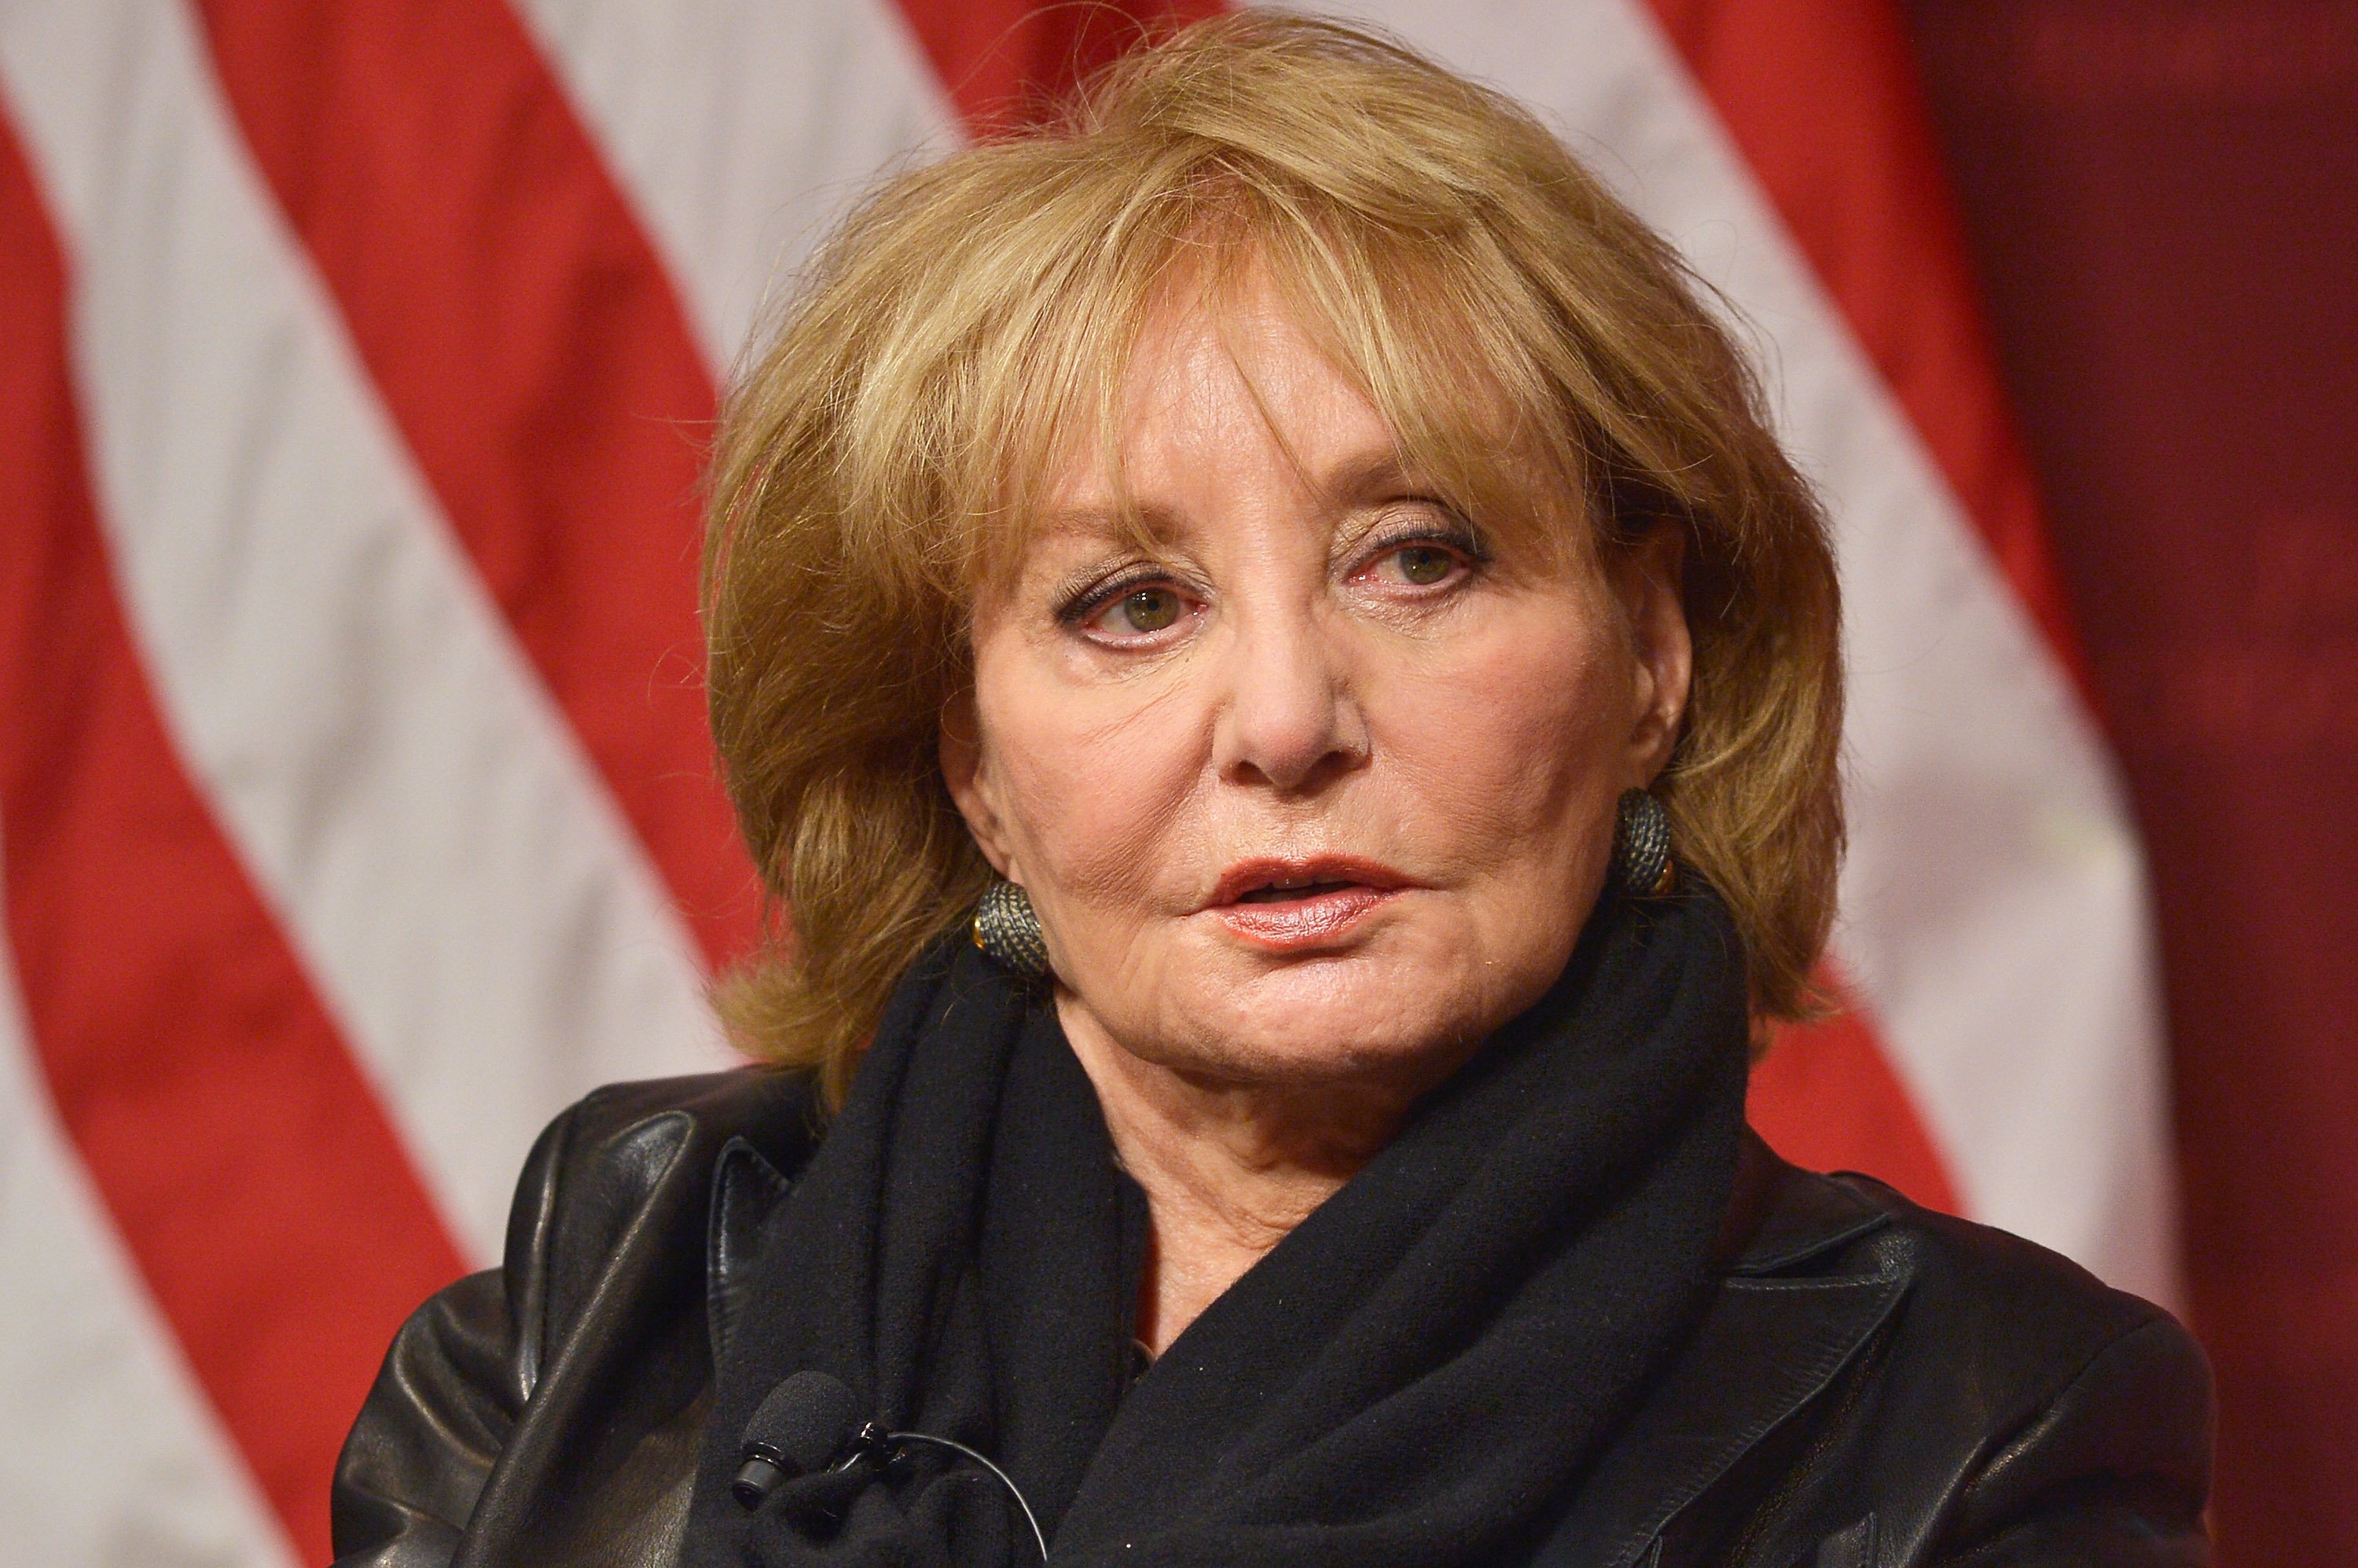 Barbara Walters speaks at the The John F. Kennedy Jr. Forum presents An Evening with Barbara Walters at Harvard University on October 7, 2014 | Photo: Getty Images